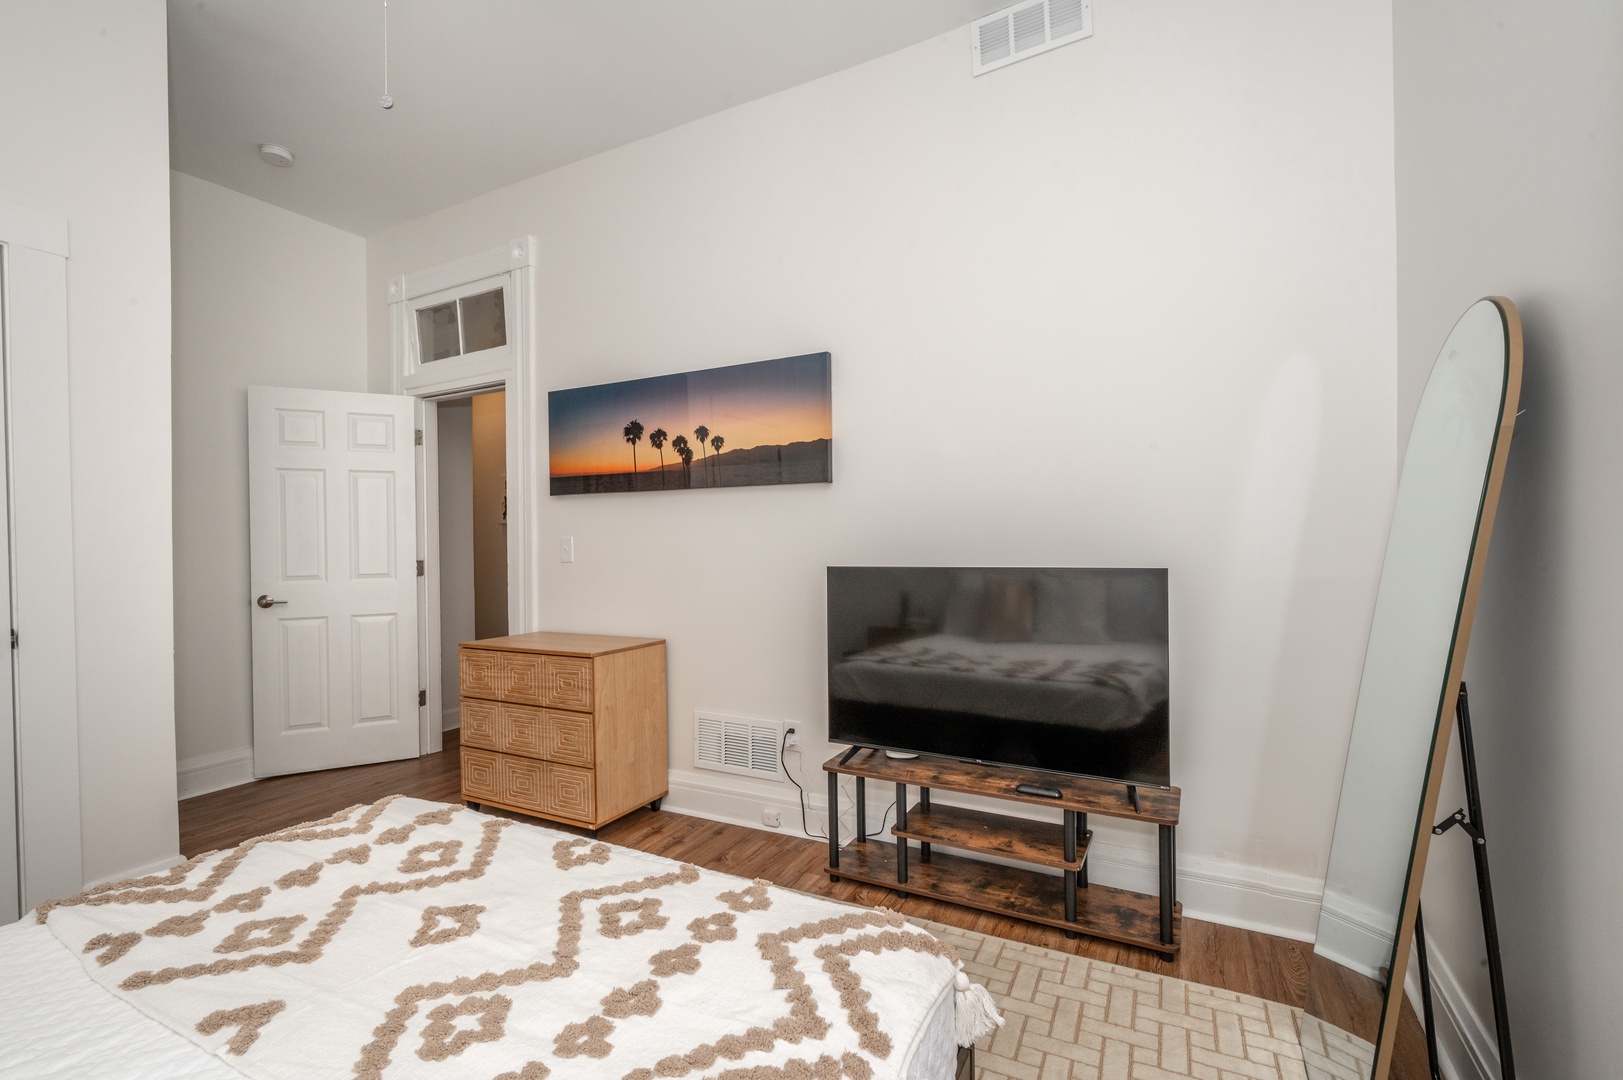 Unit 3: The 2nd of 2 queen bedrooms offers a Smart TV & ceiling fan